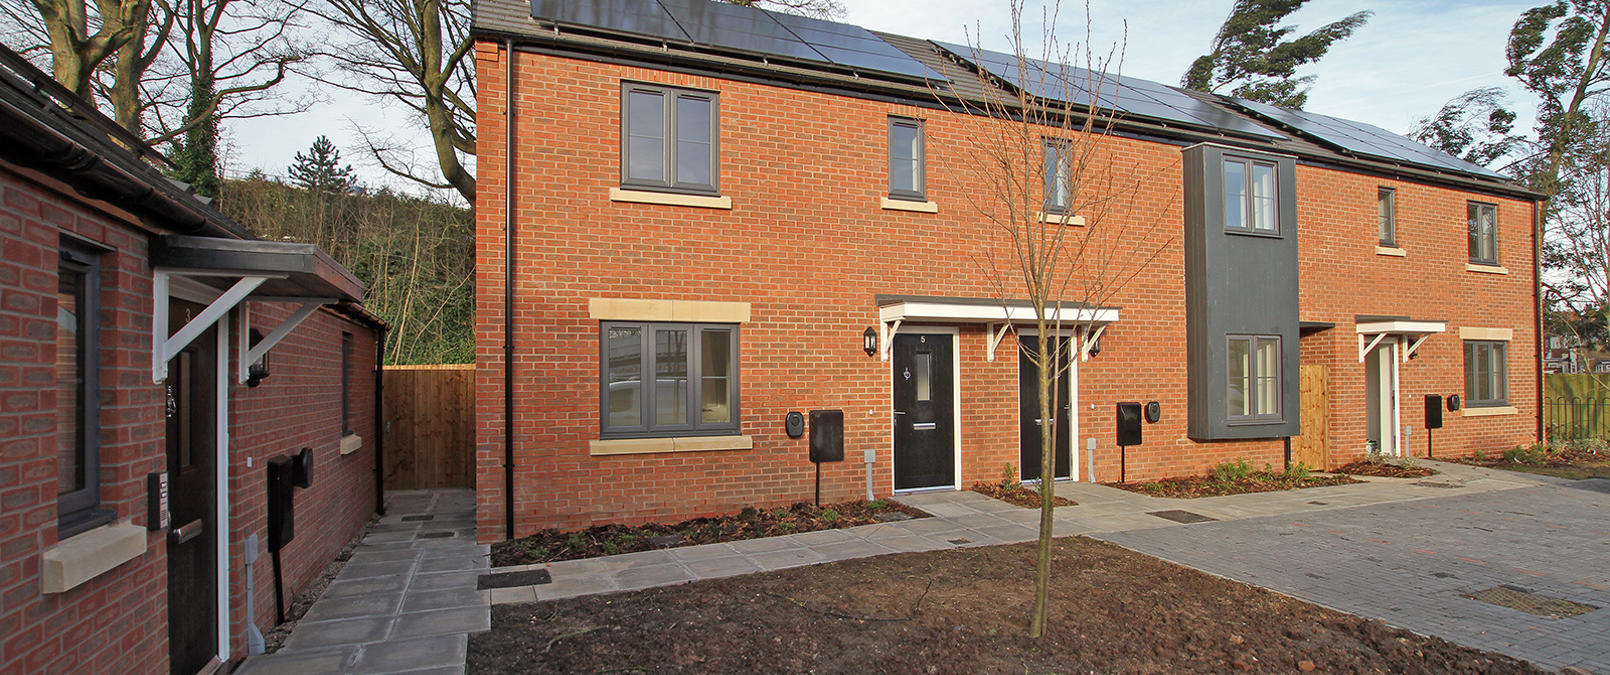 New homes in Clay Cross